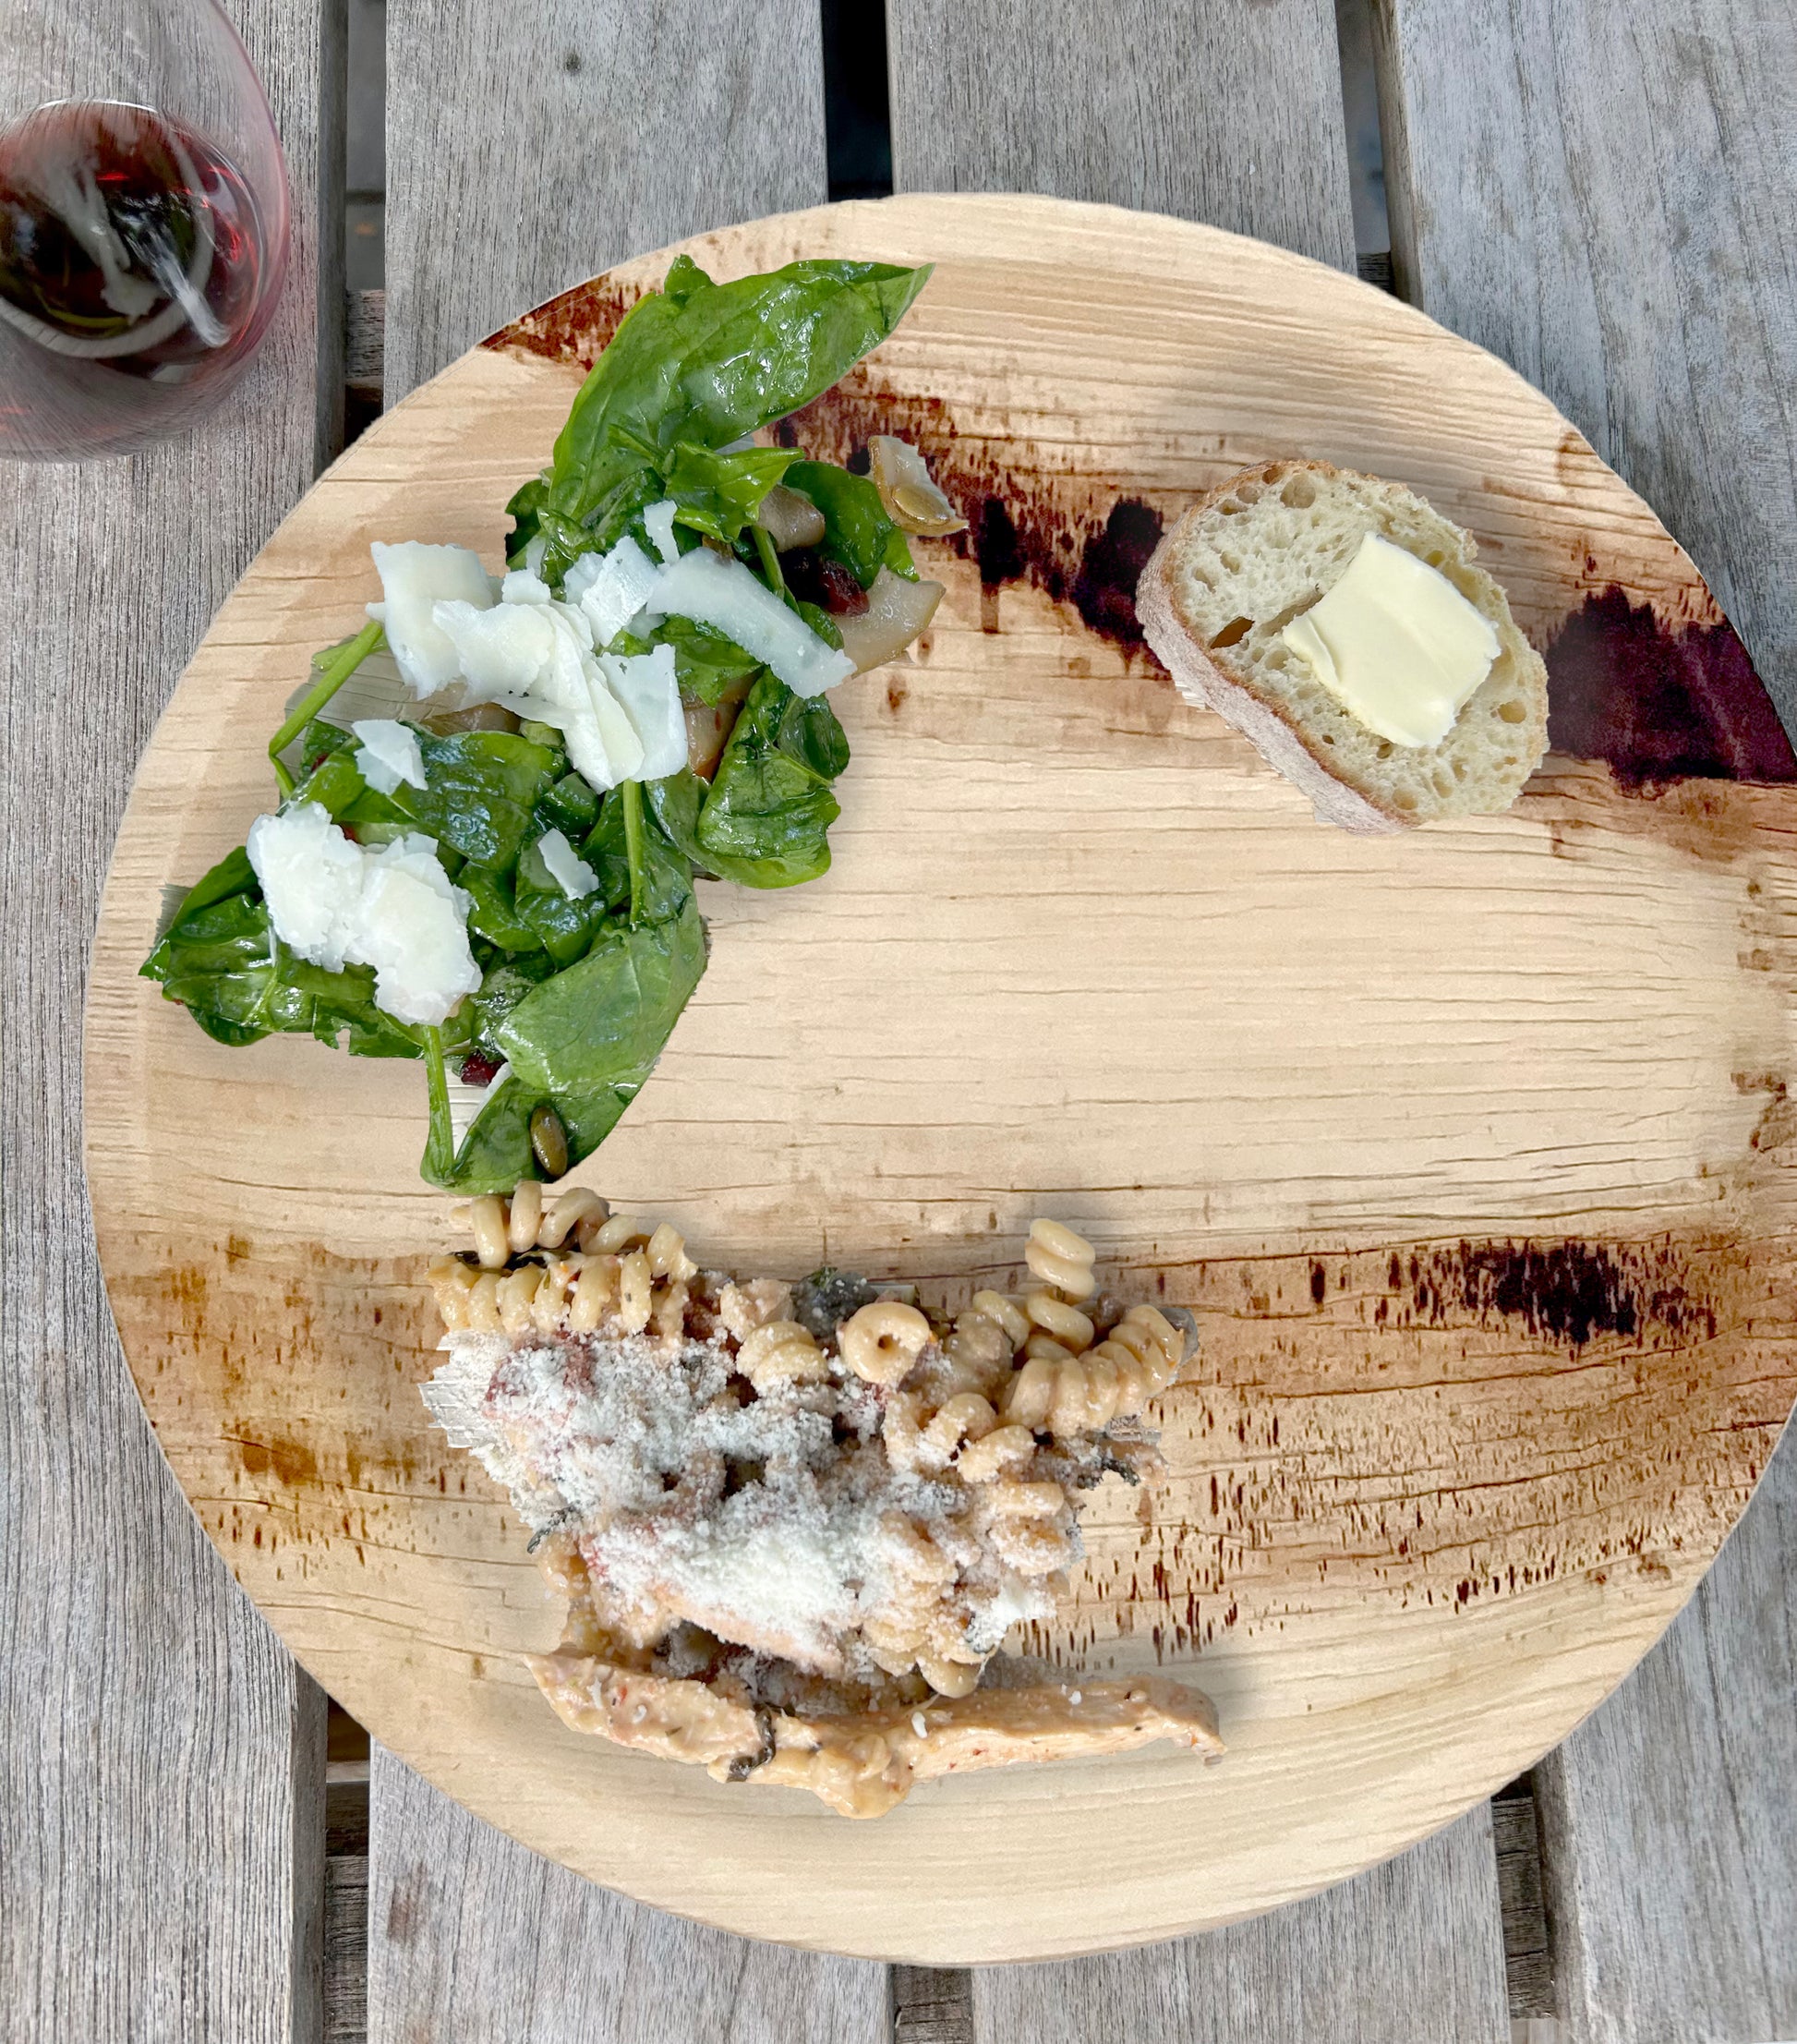 NEATtable compostable palm leaf plate at an outdoor dinner.